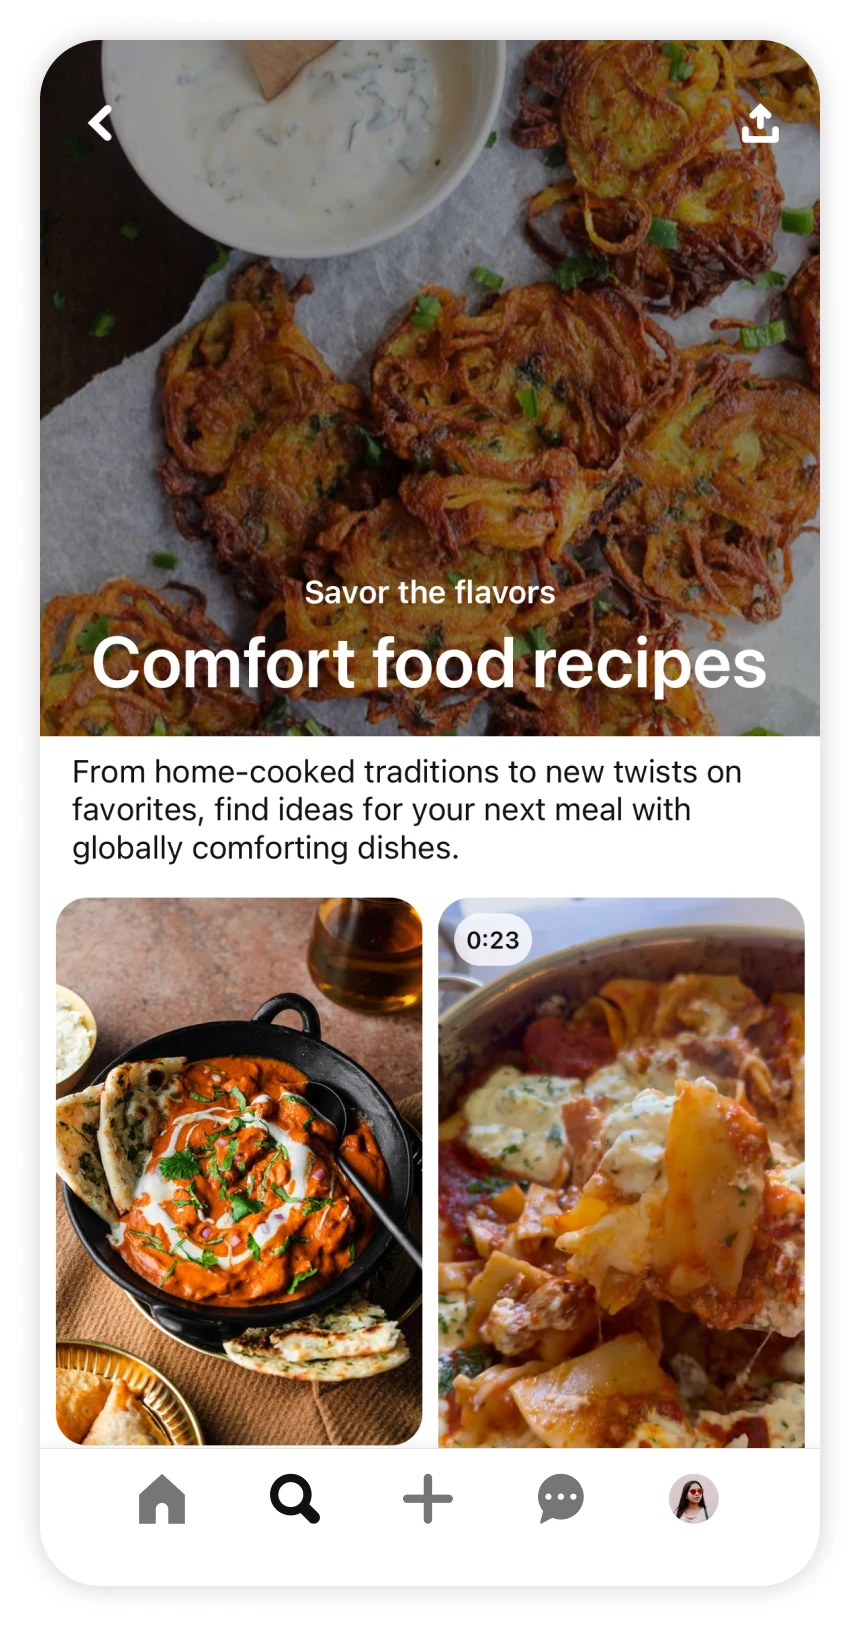 Screen shot of Pinterest app showing trend article for comfort food recipes